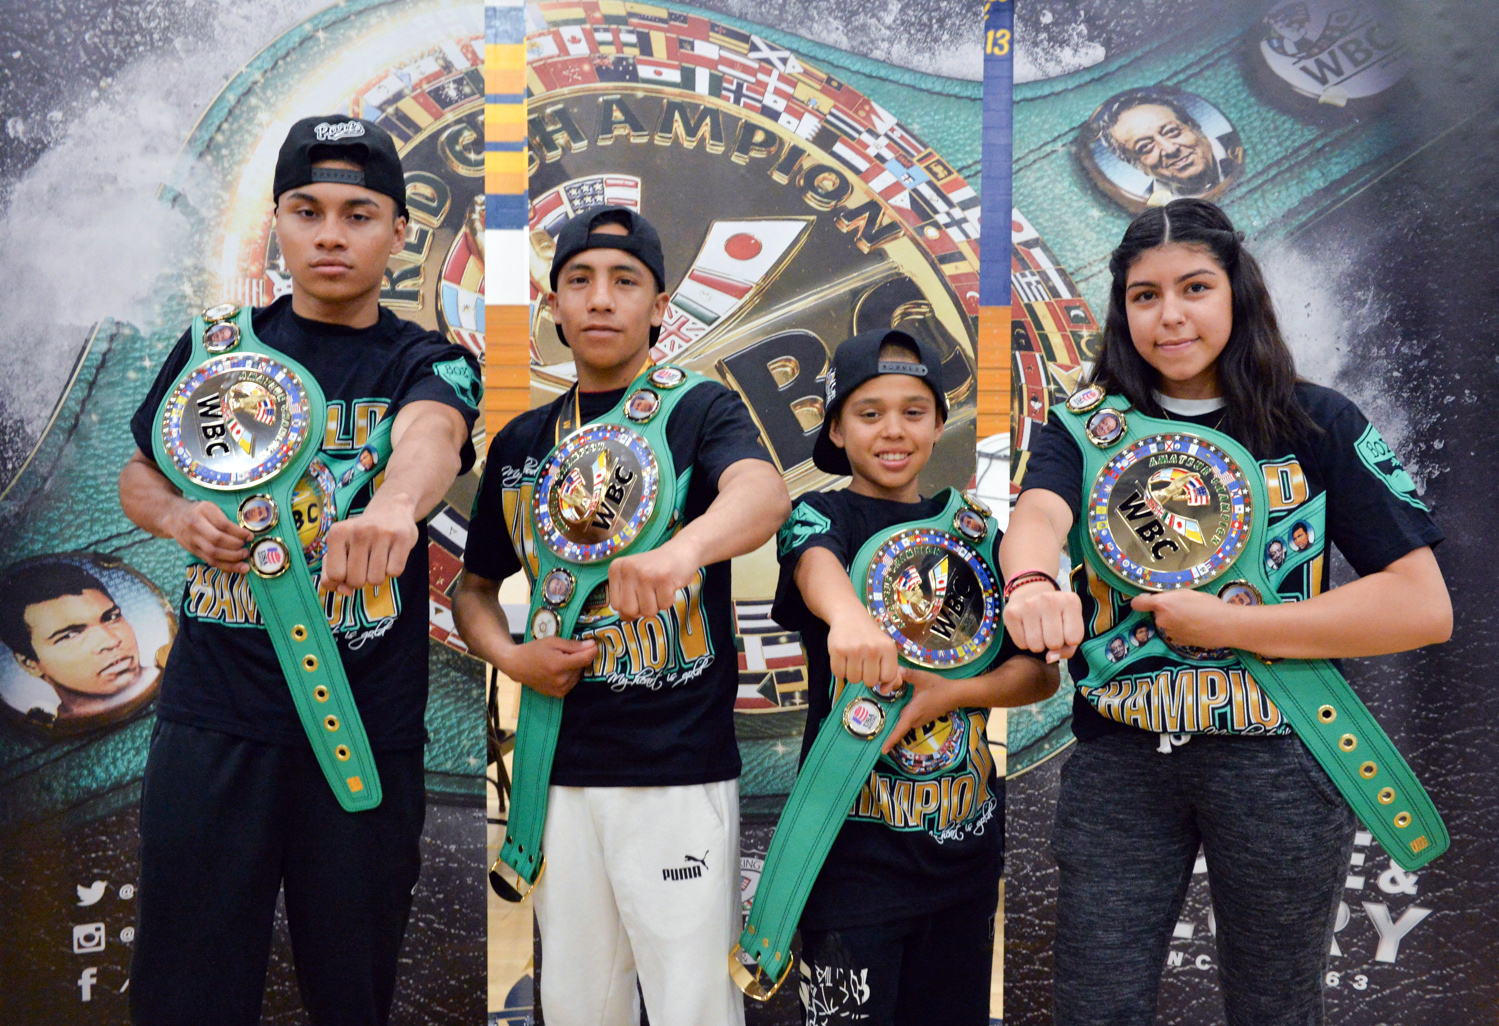 Los Angeles Amateur Boxers take the Green Belt Challenge